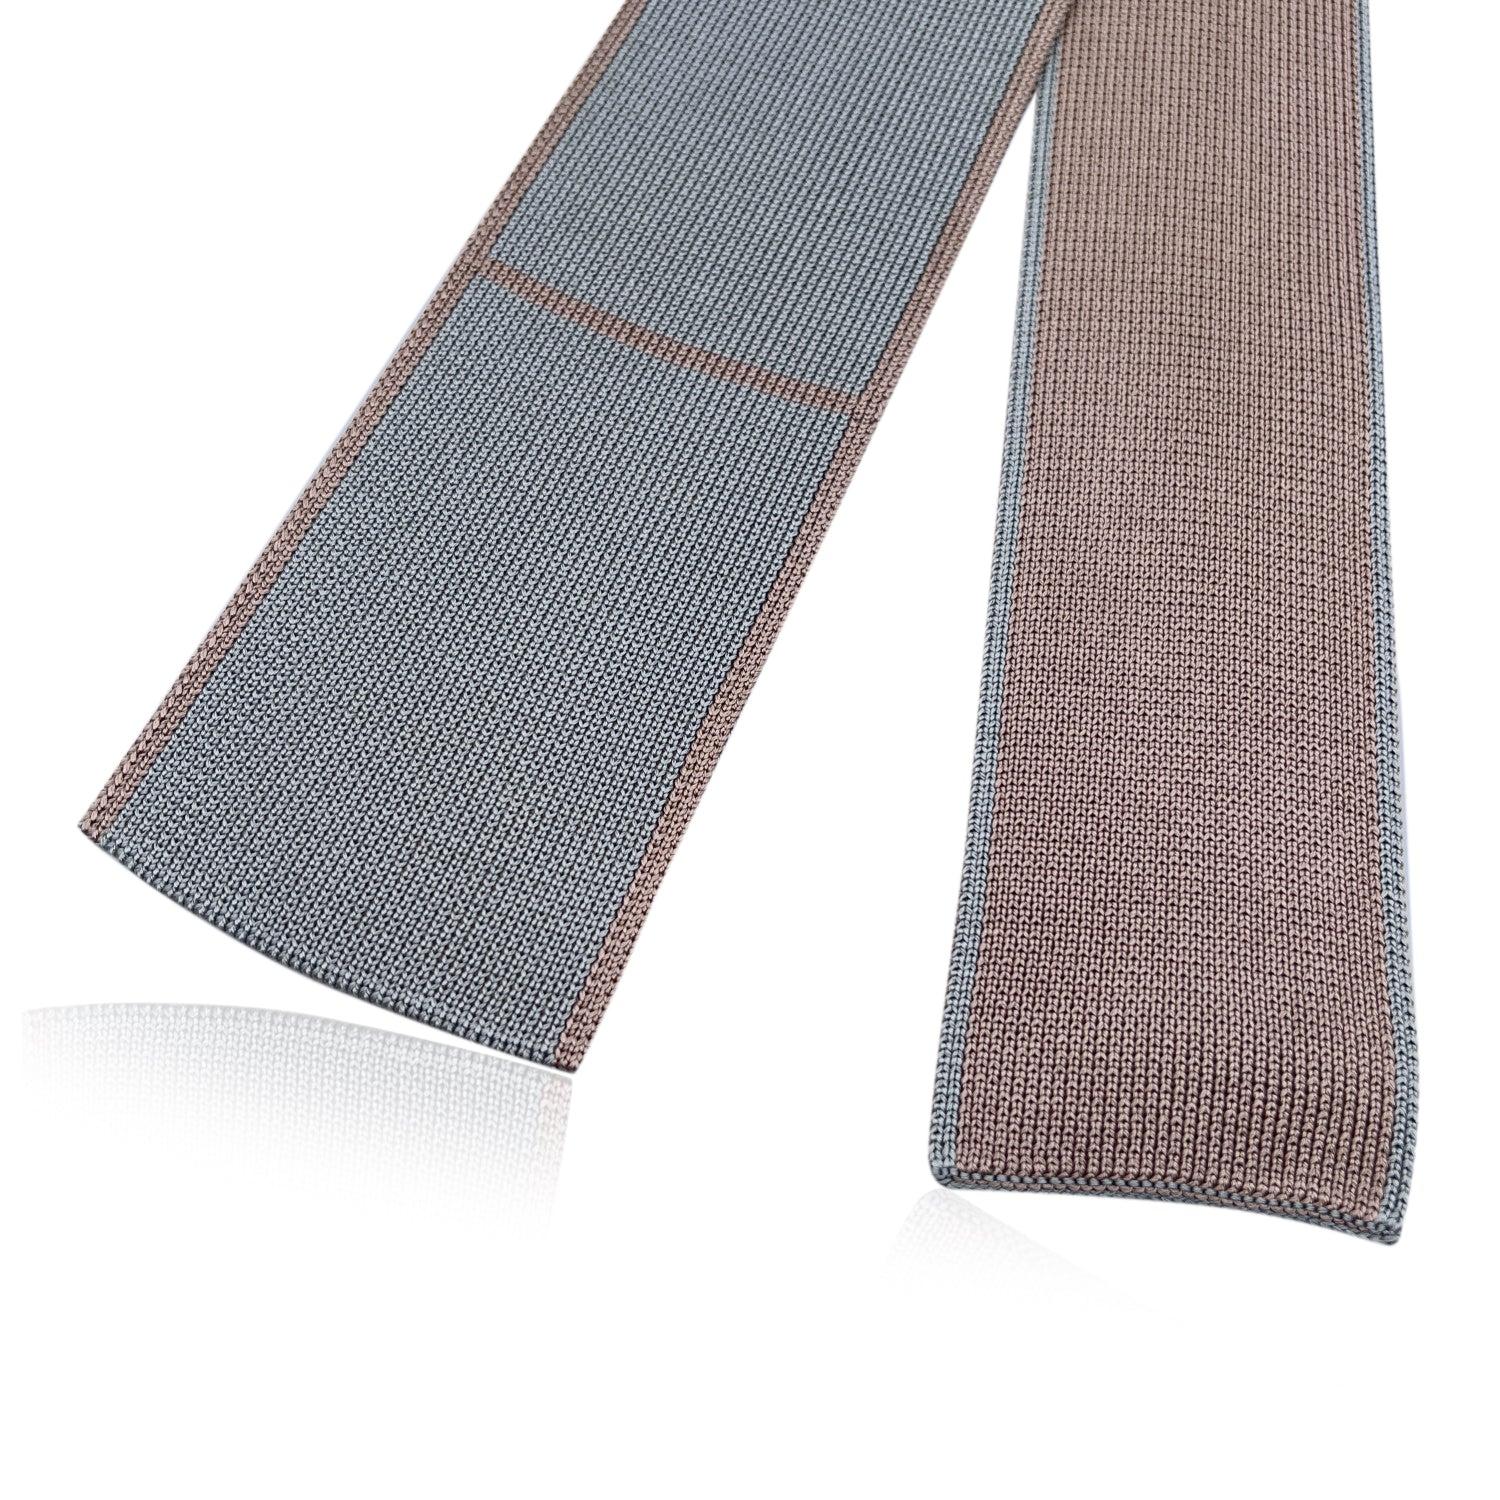 Elegant Hermes 'Maille de Soie' Neck Tie in grey and beige silk. 100% knit silk. Reversible design. Composition: 100% Silk. Hermes composition tag attached. Made in Italy. Total length: 55.5 inches - 141 cm. Max width: 3 inches - 7.5 cm Details